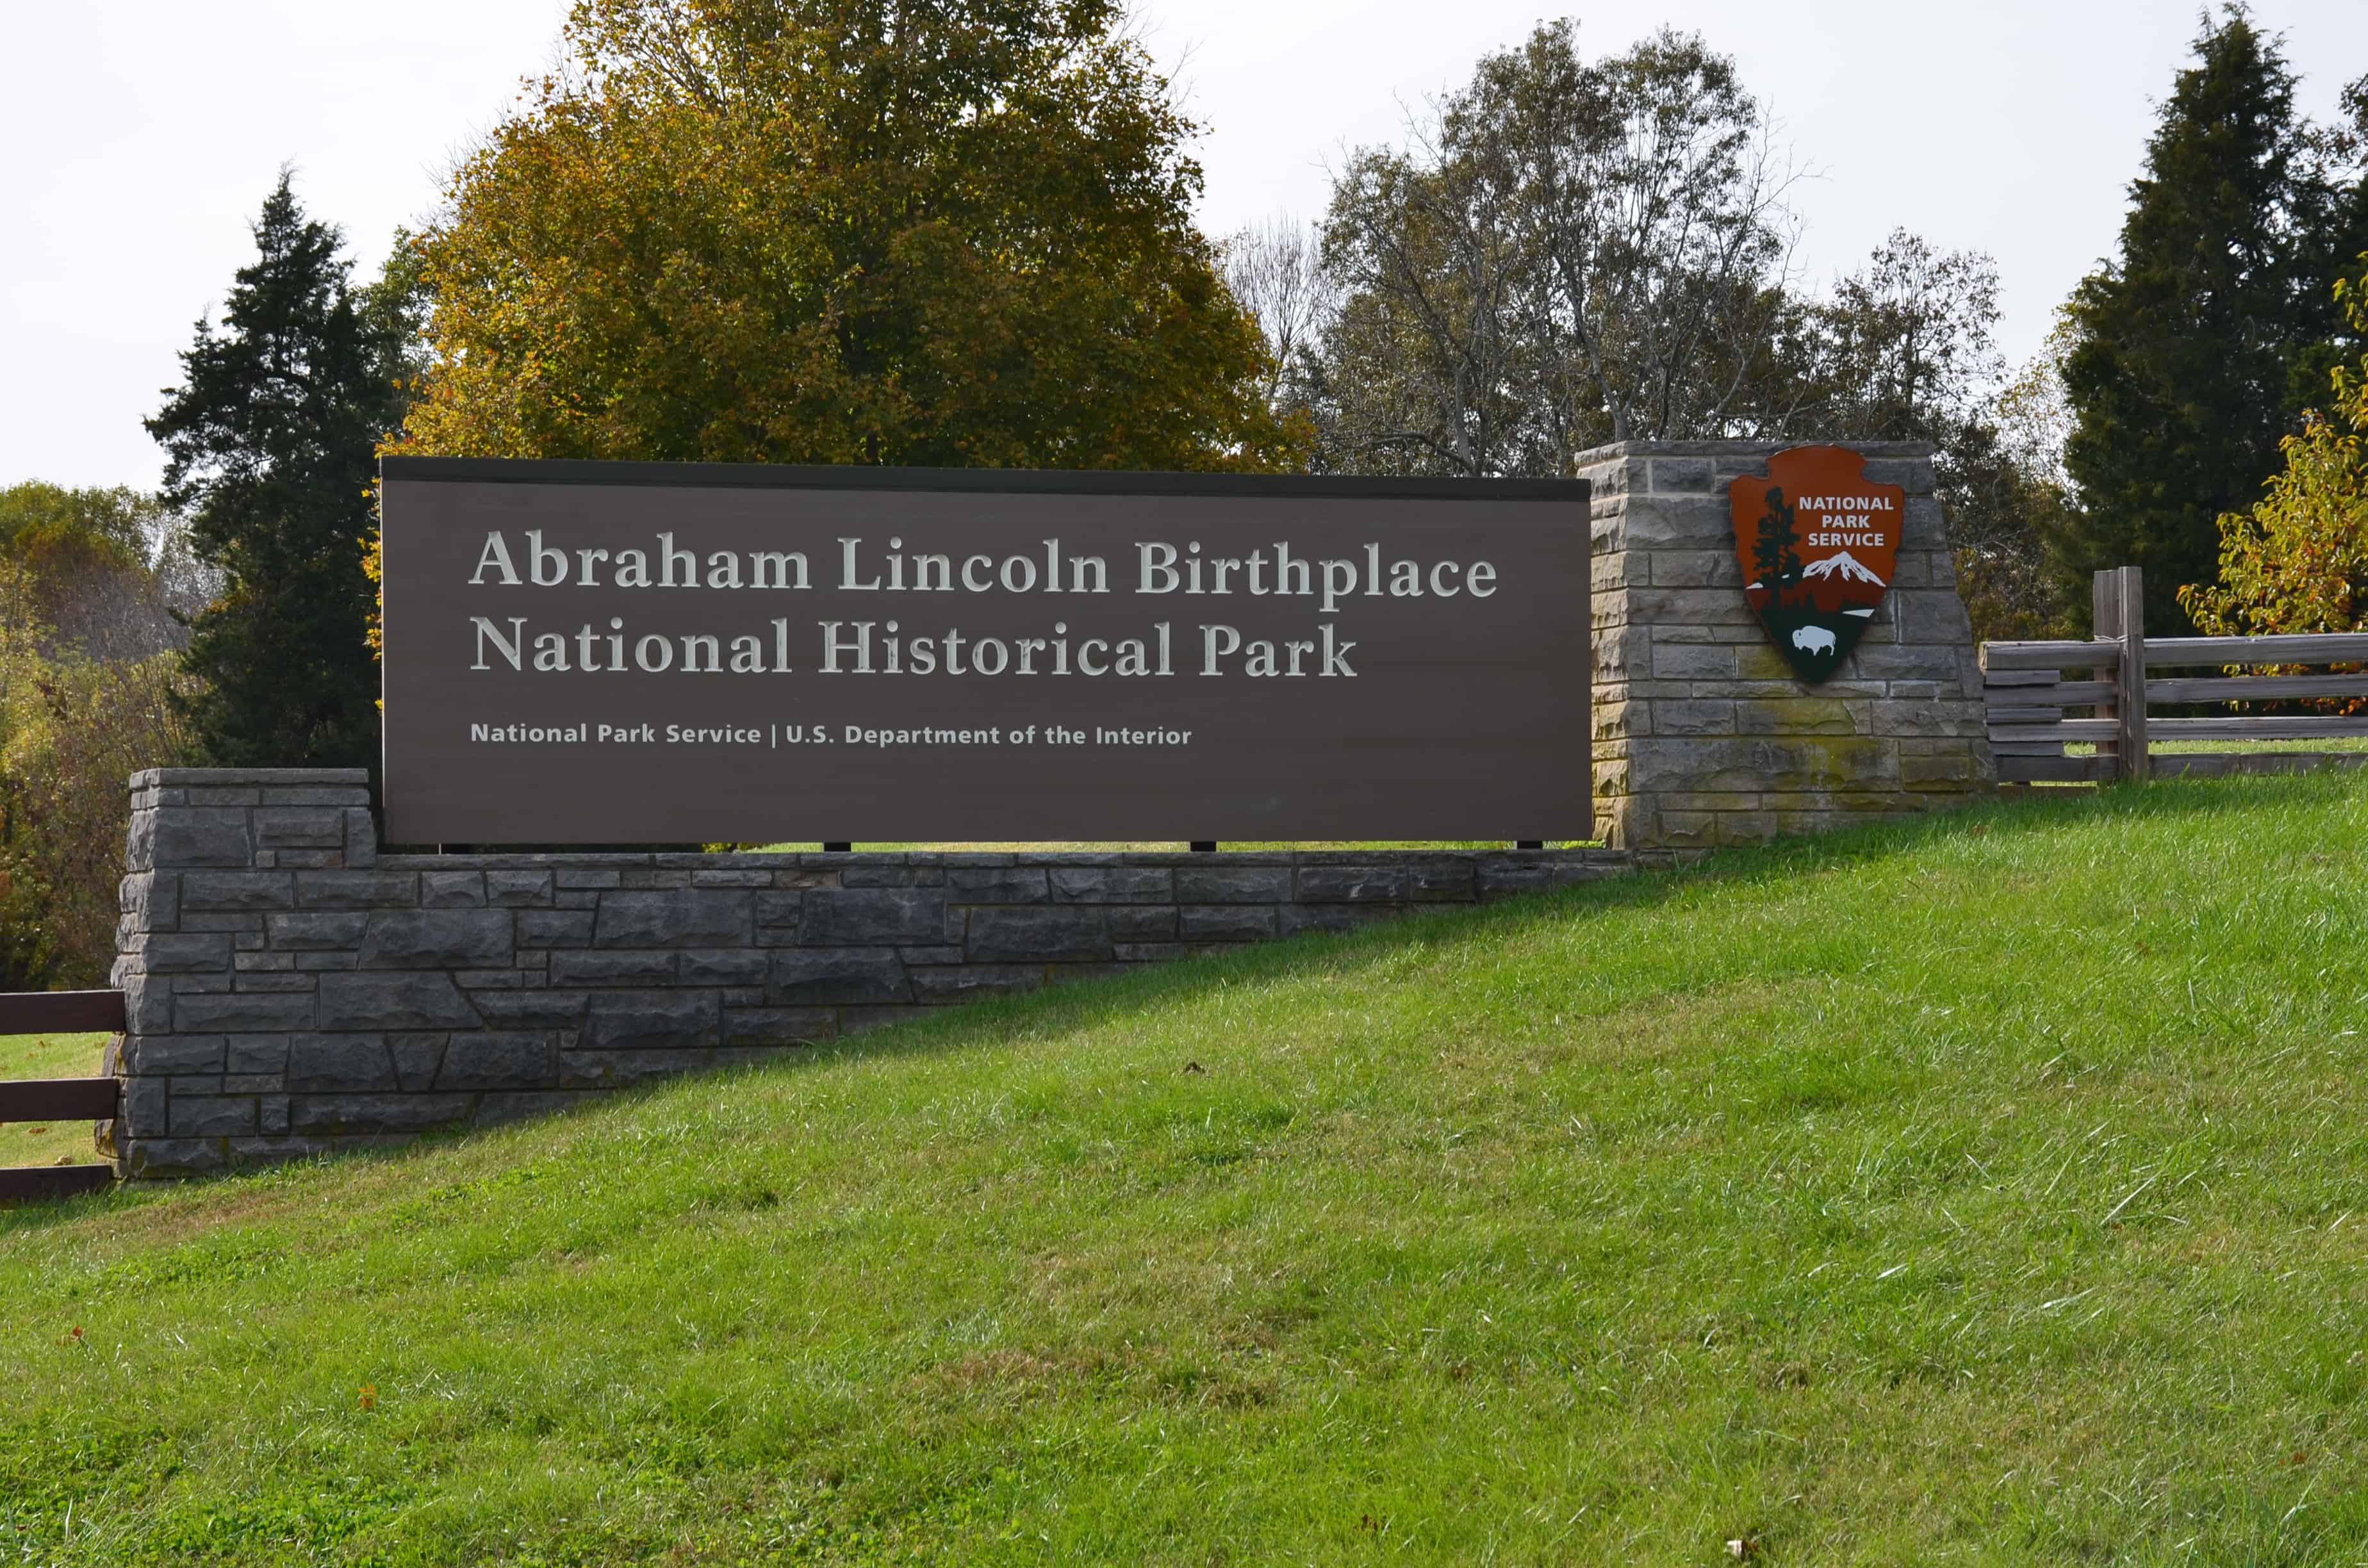 Abraham Lincoln Birthplace National Historical Park in Kentucky